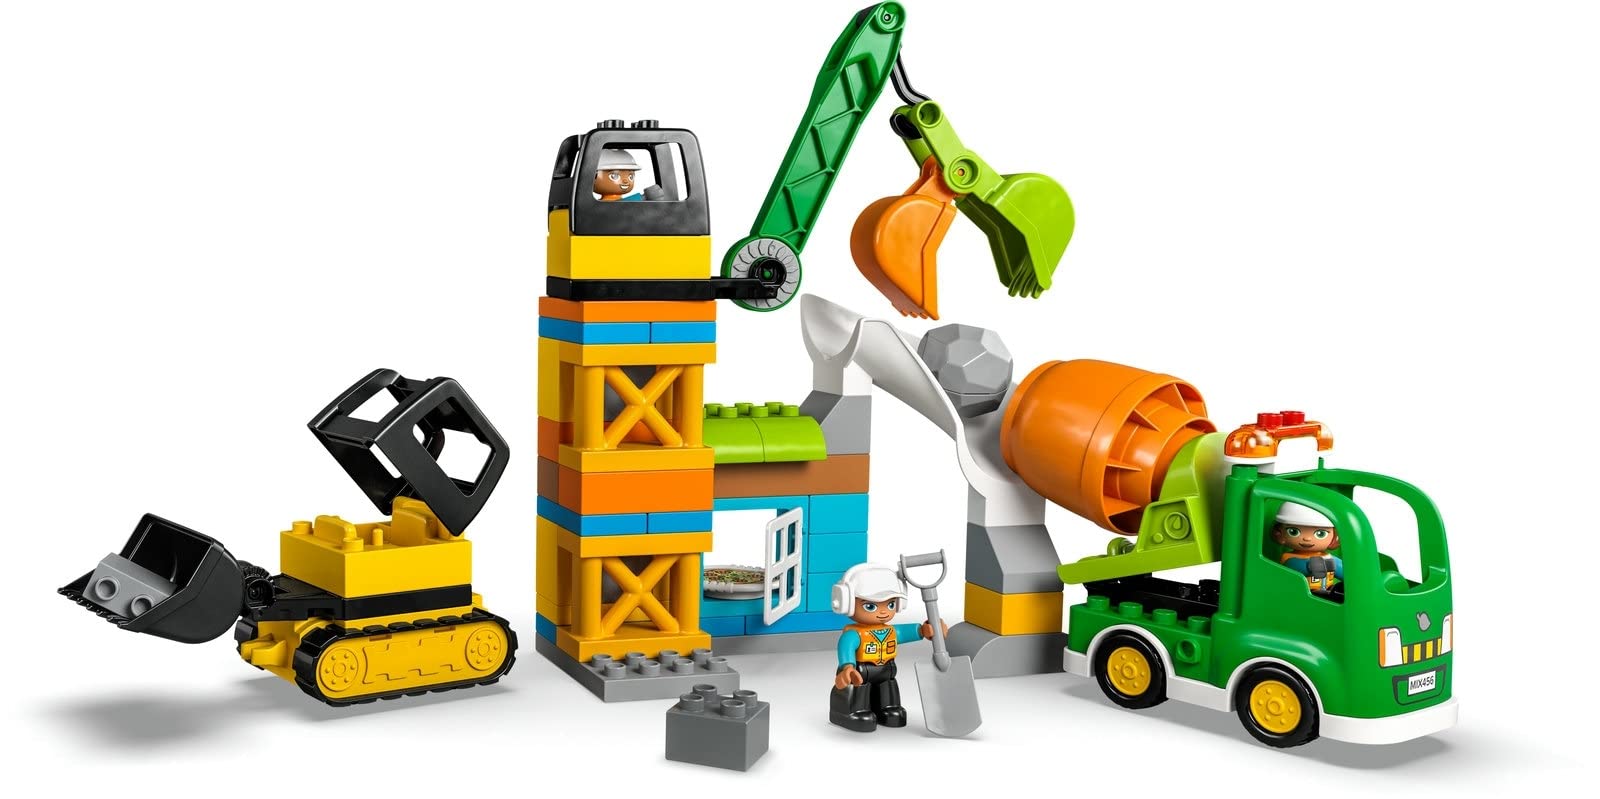 Lego Duplo Set of 3: 10990 Construction Site with Construction Vehicles, 10931 Excavator and Truck & 10930 Wheel Loader